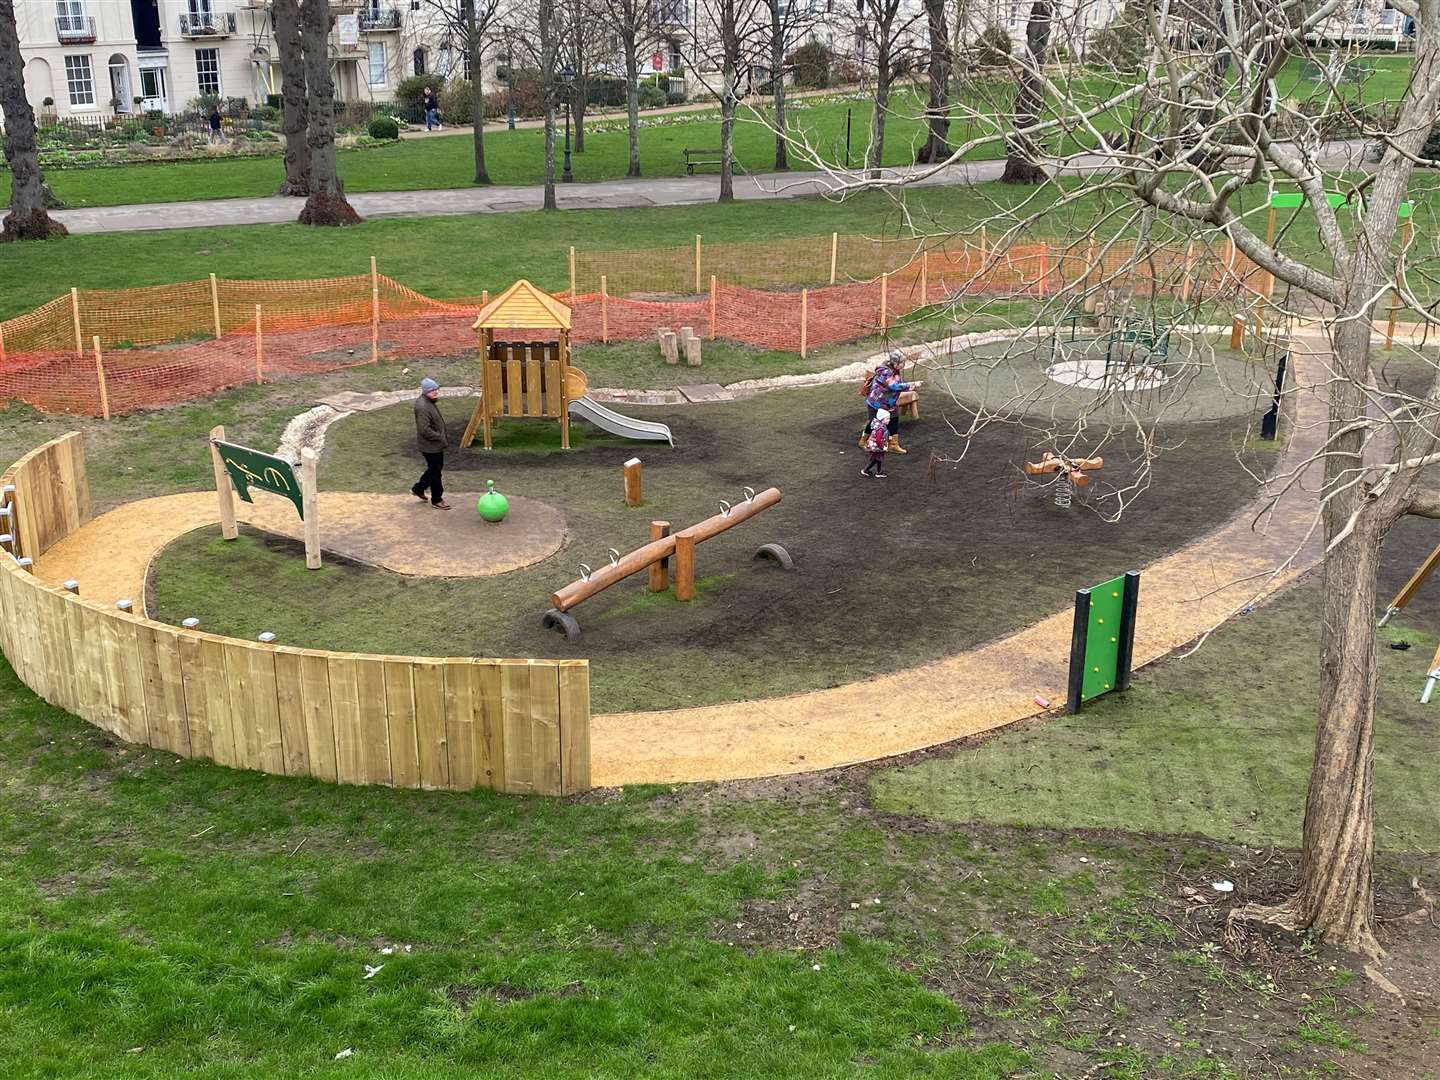 Canterbury City Council commissioned the construction of the playground at Dane John Gardens at the cost of £150,000